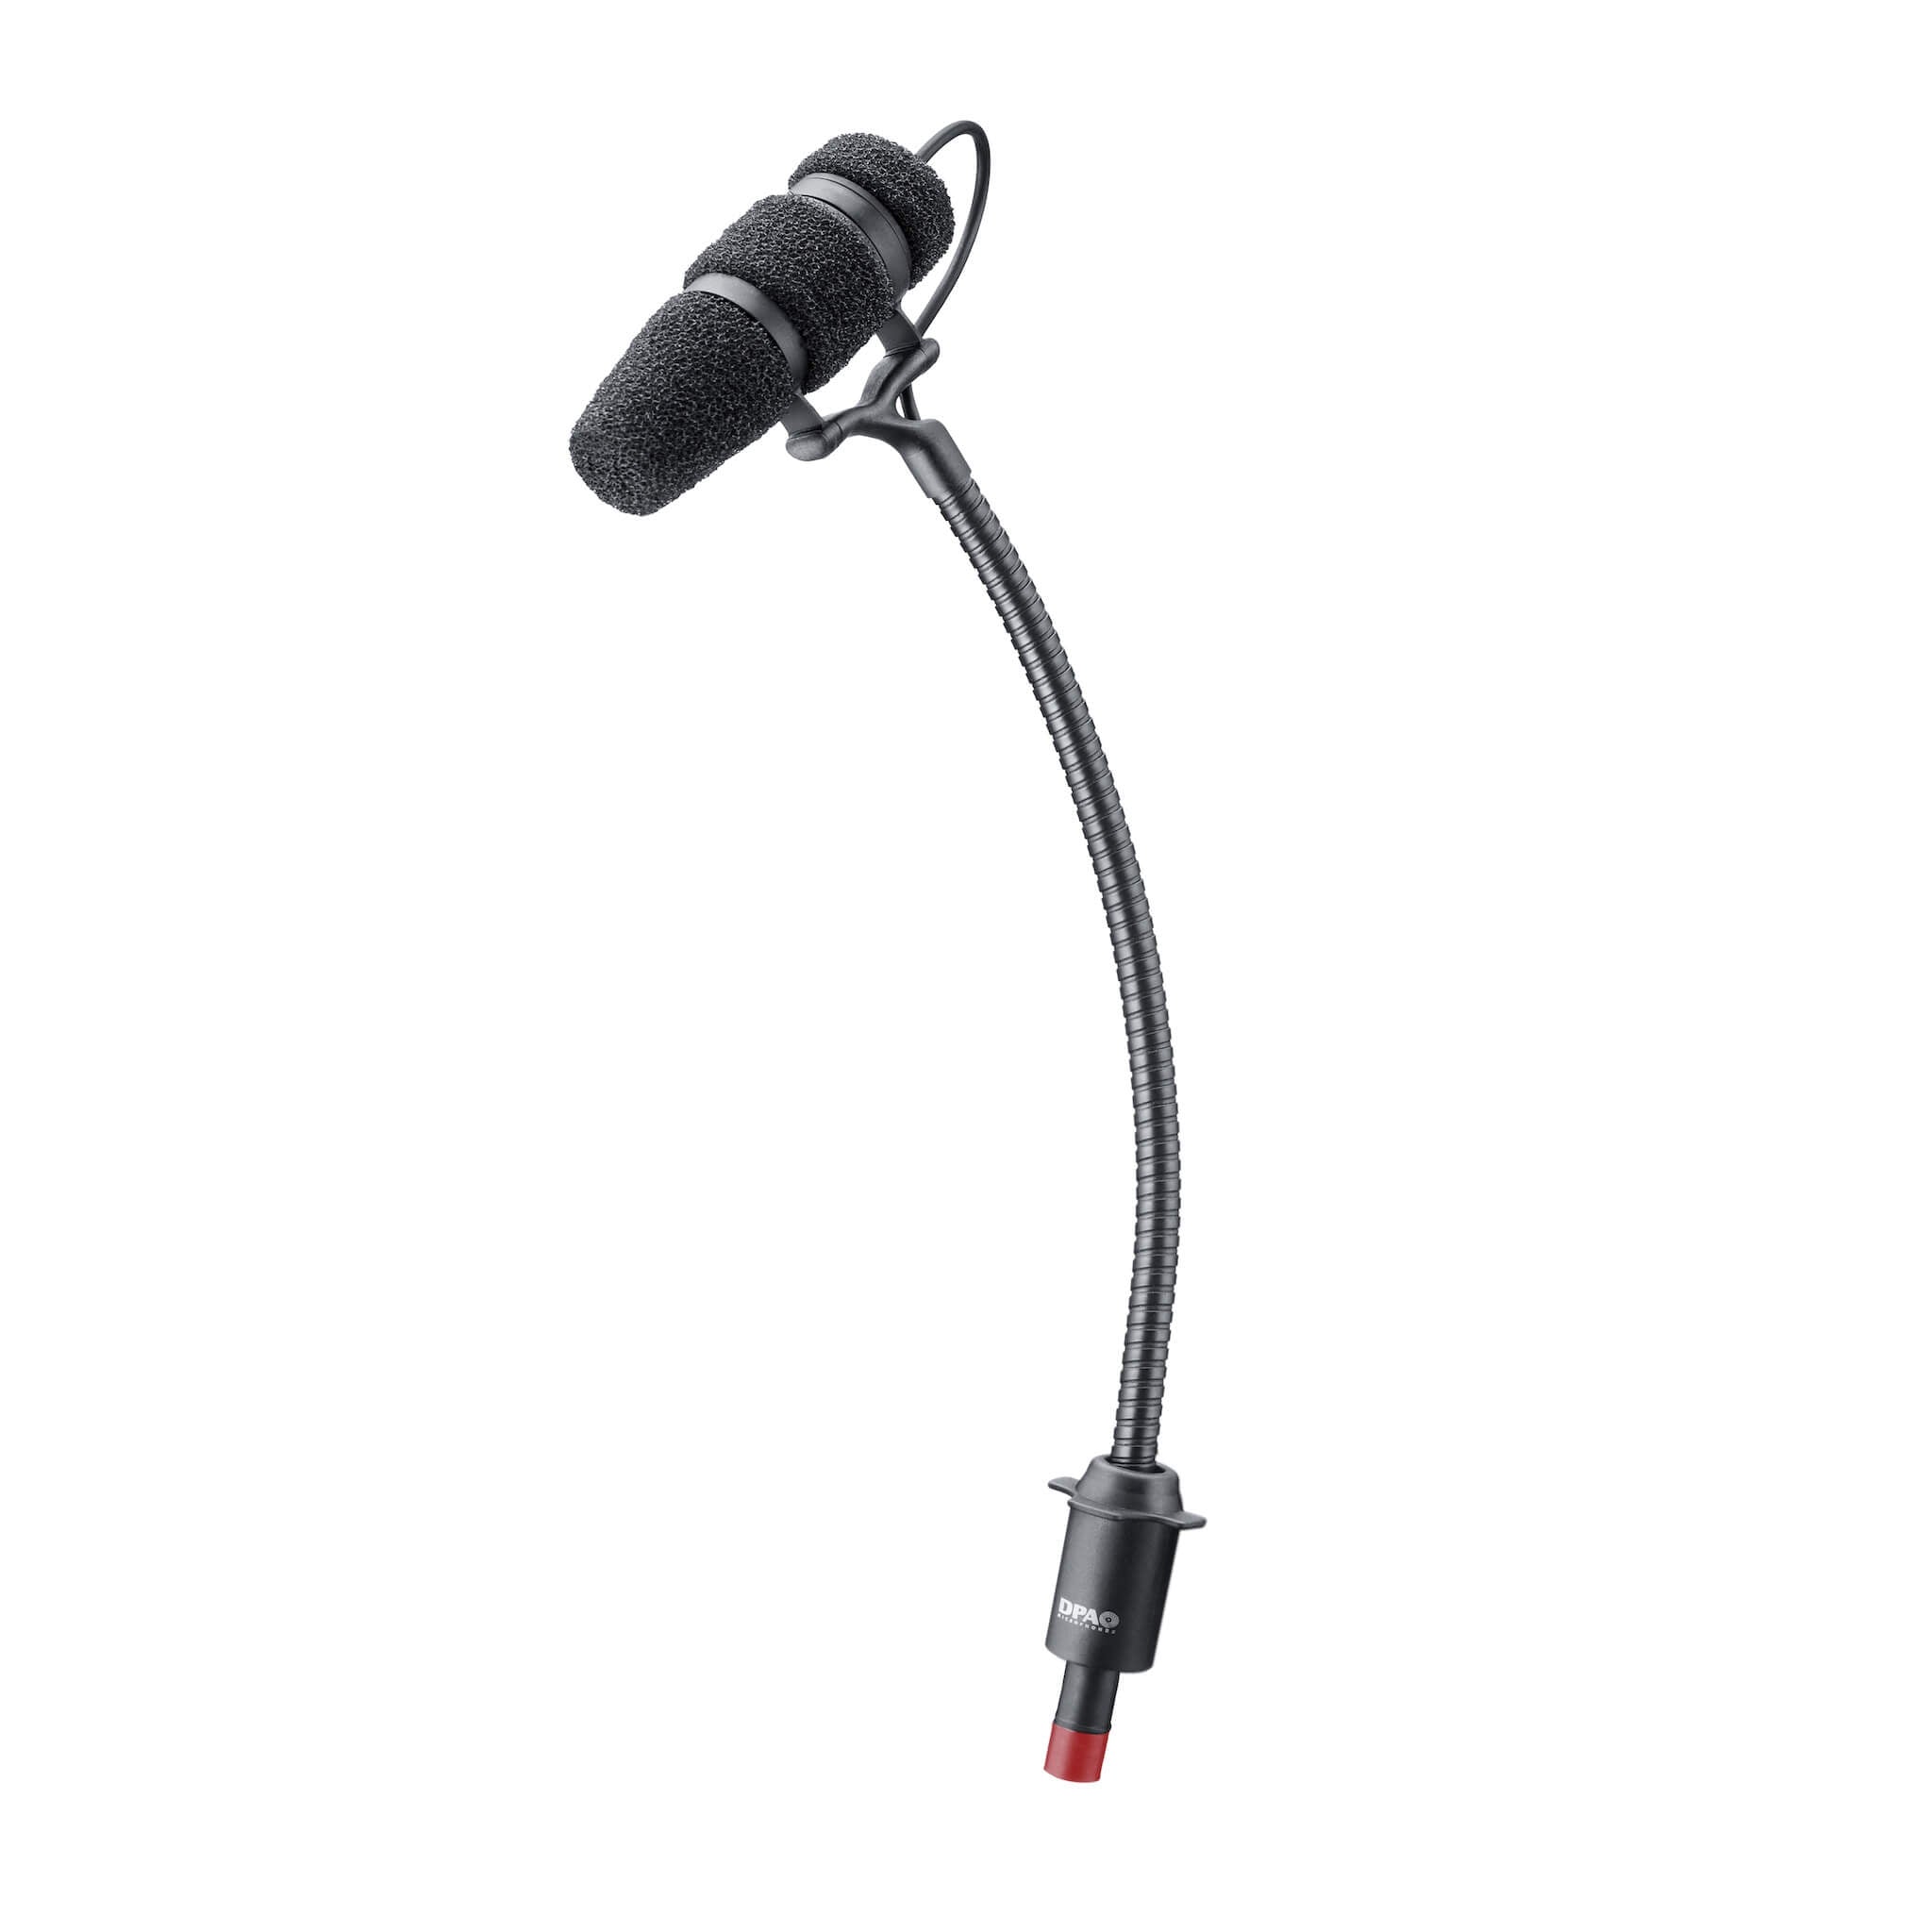 DPA 4099-DC-1 Instrument Microphone for Loud SPL